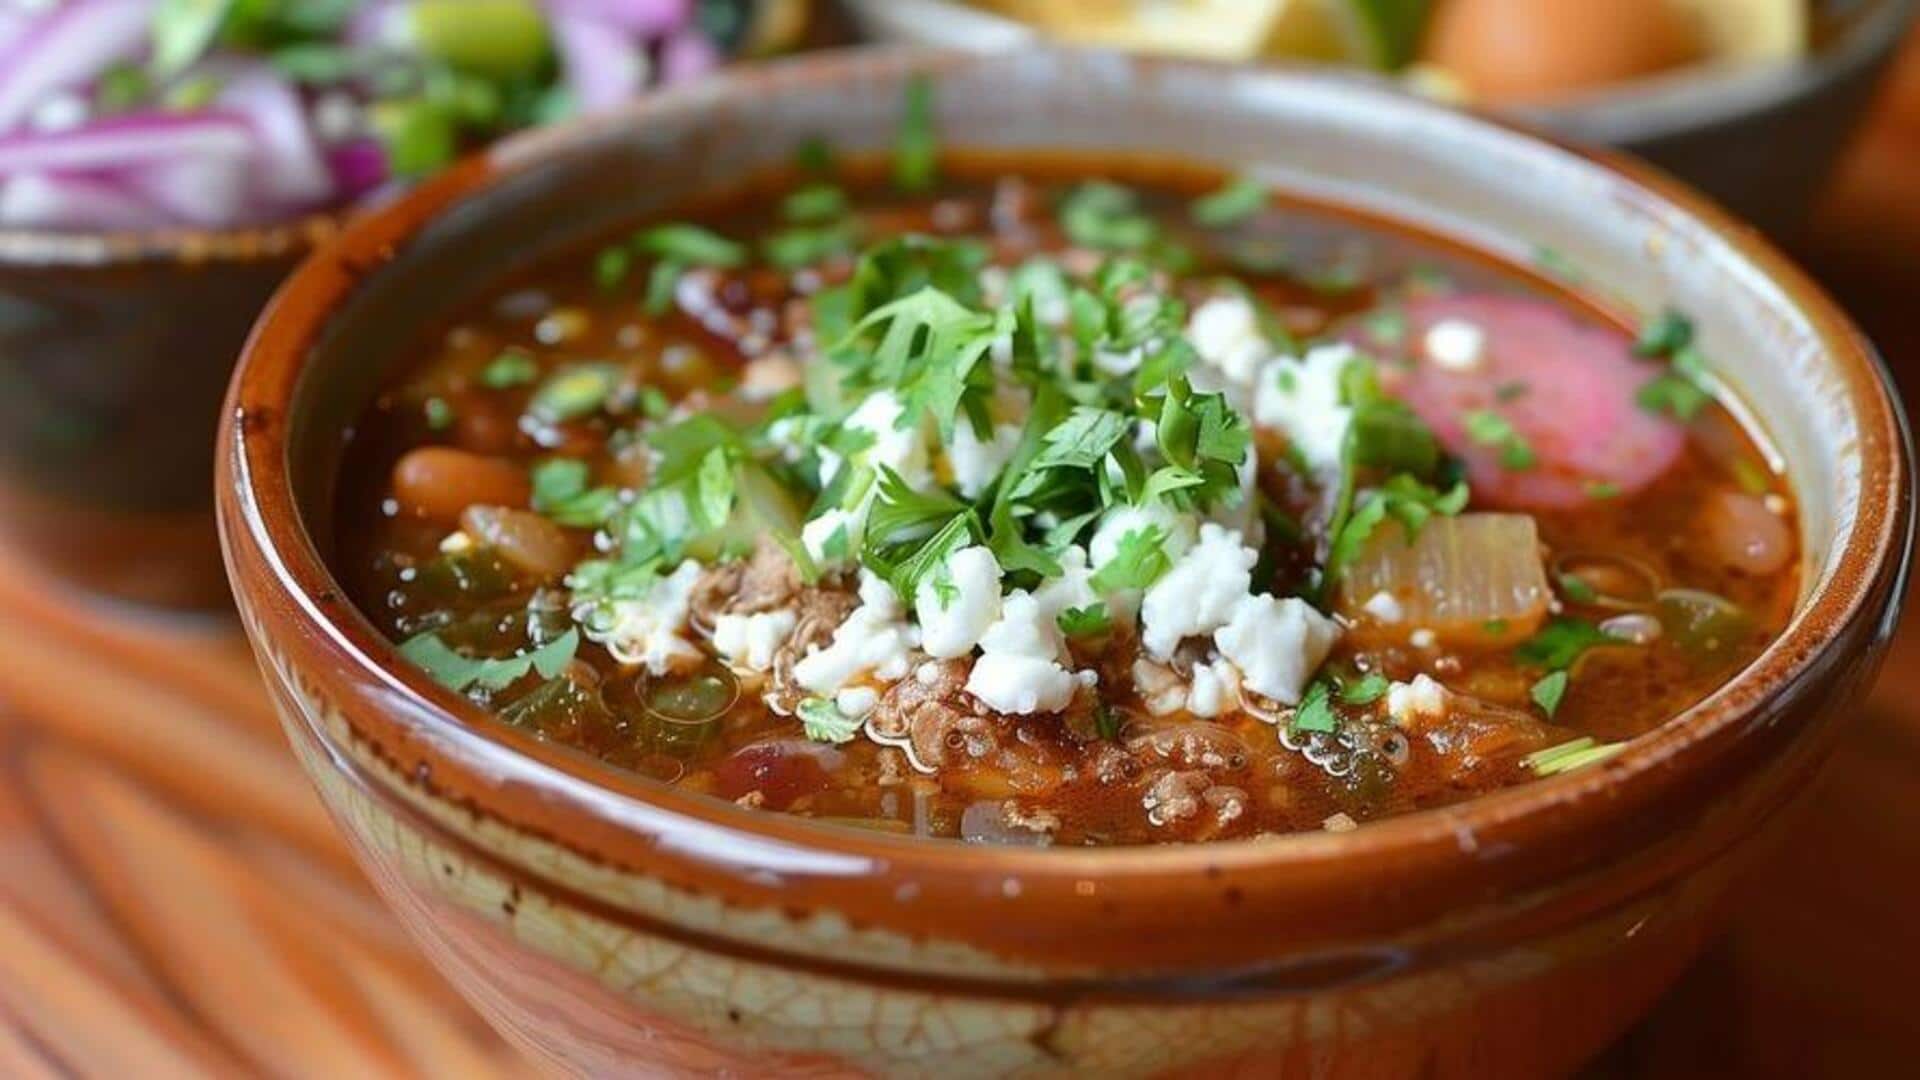 Recipe: Try this Mexican vegan pozole hominy stew